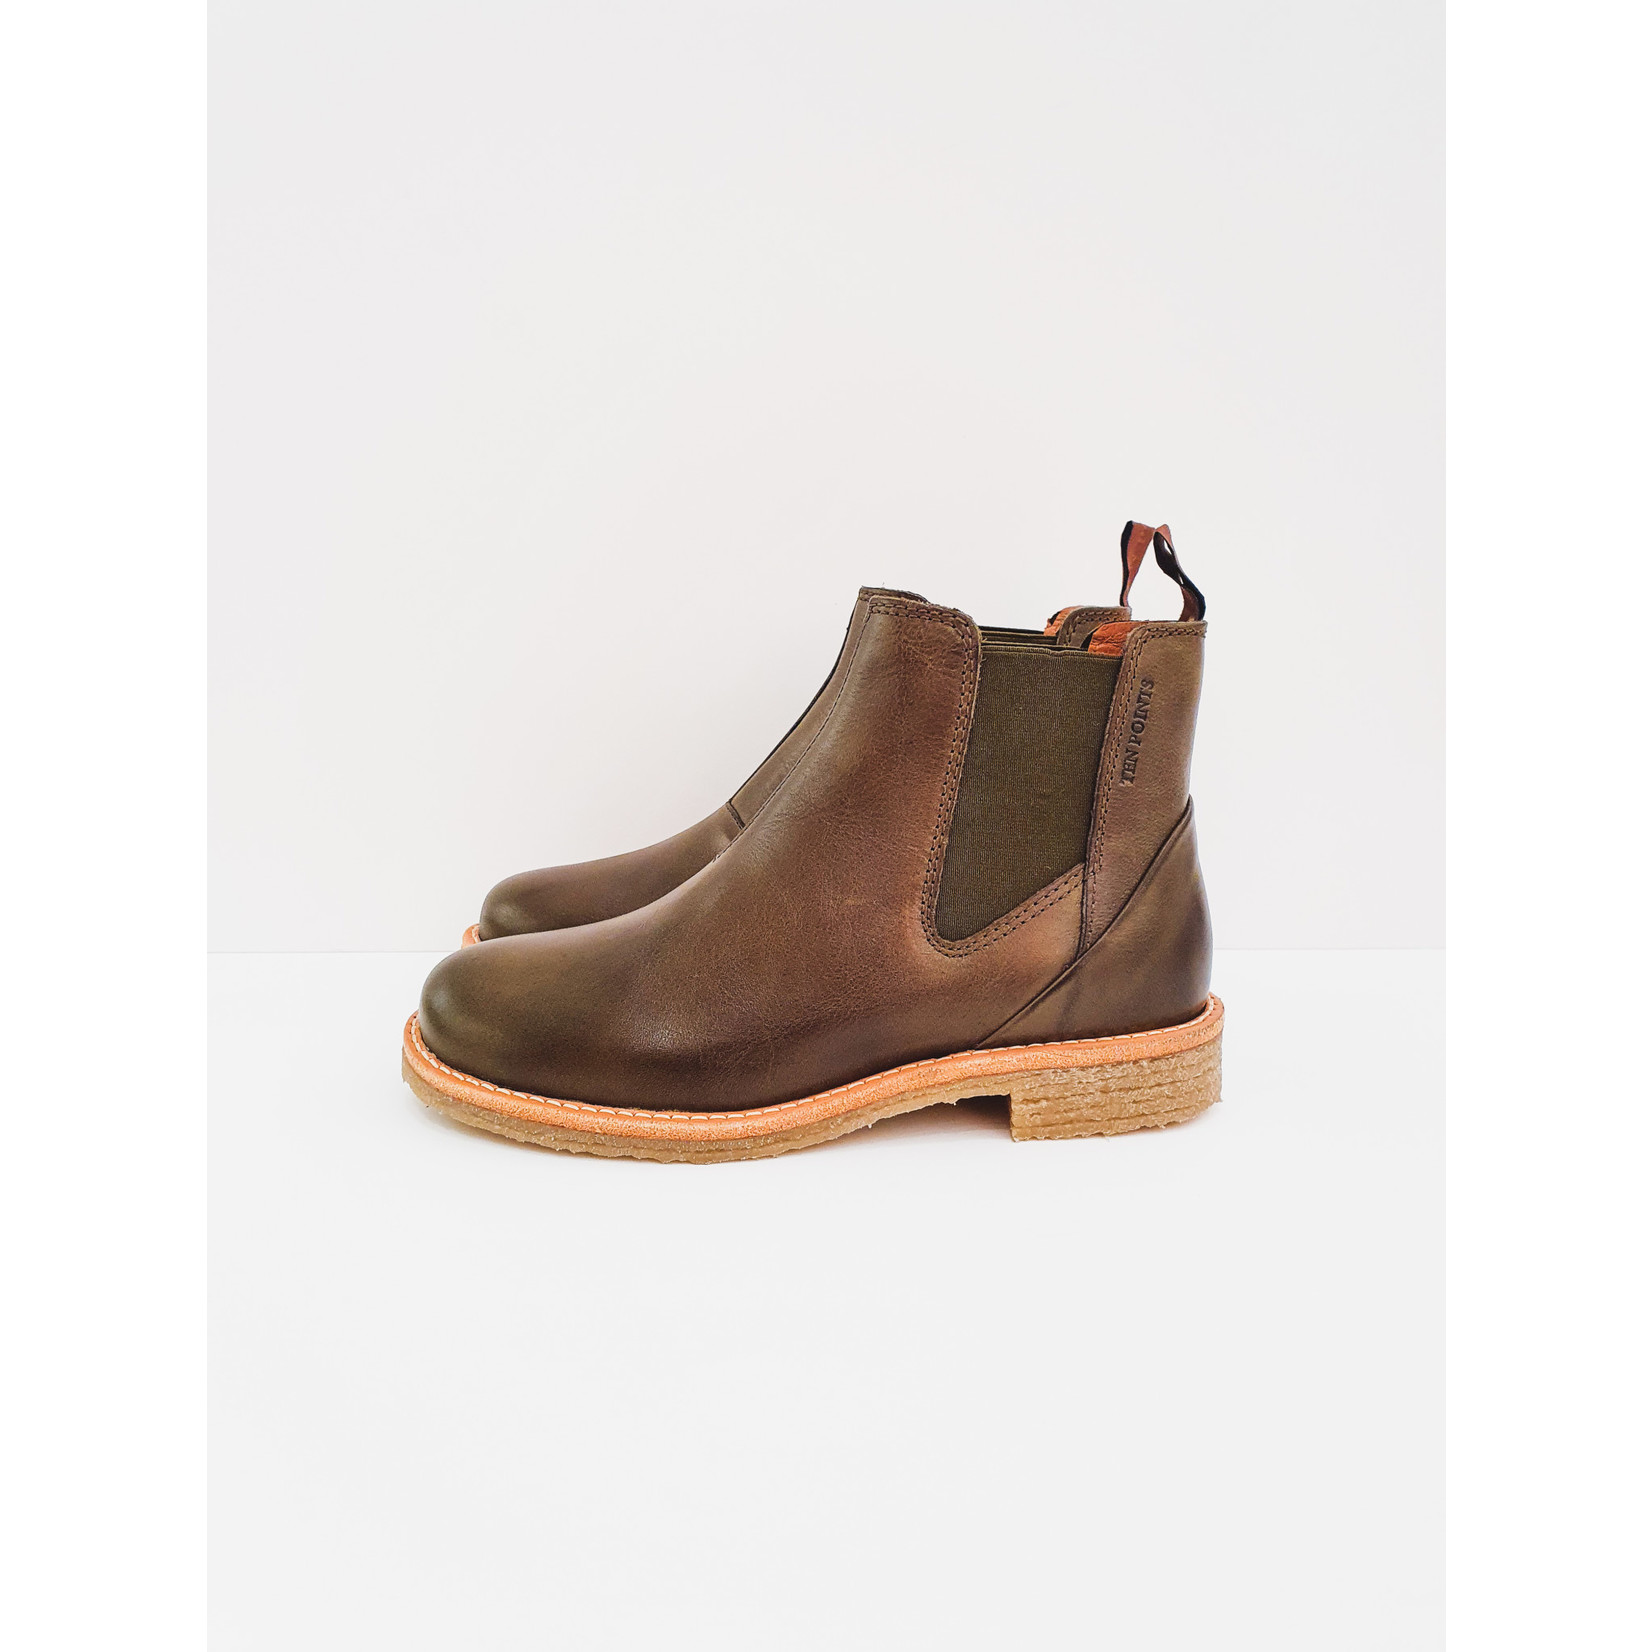 Forest green chelsea boots